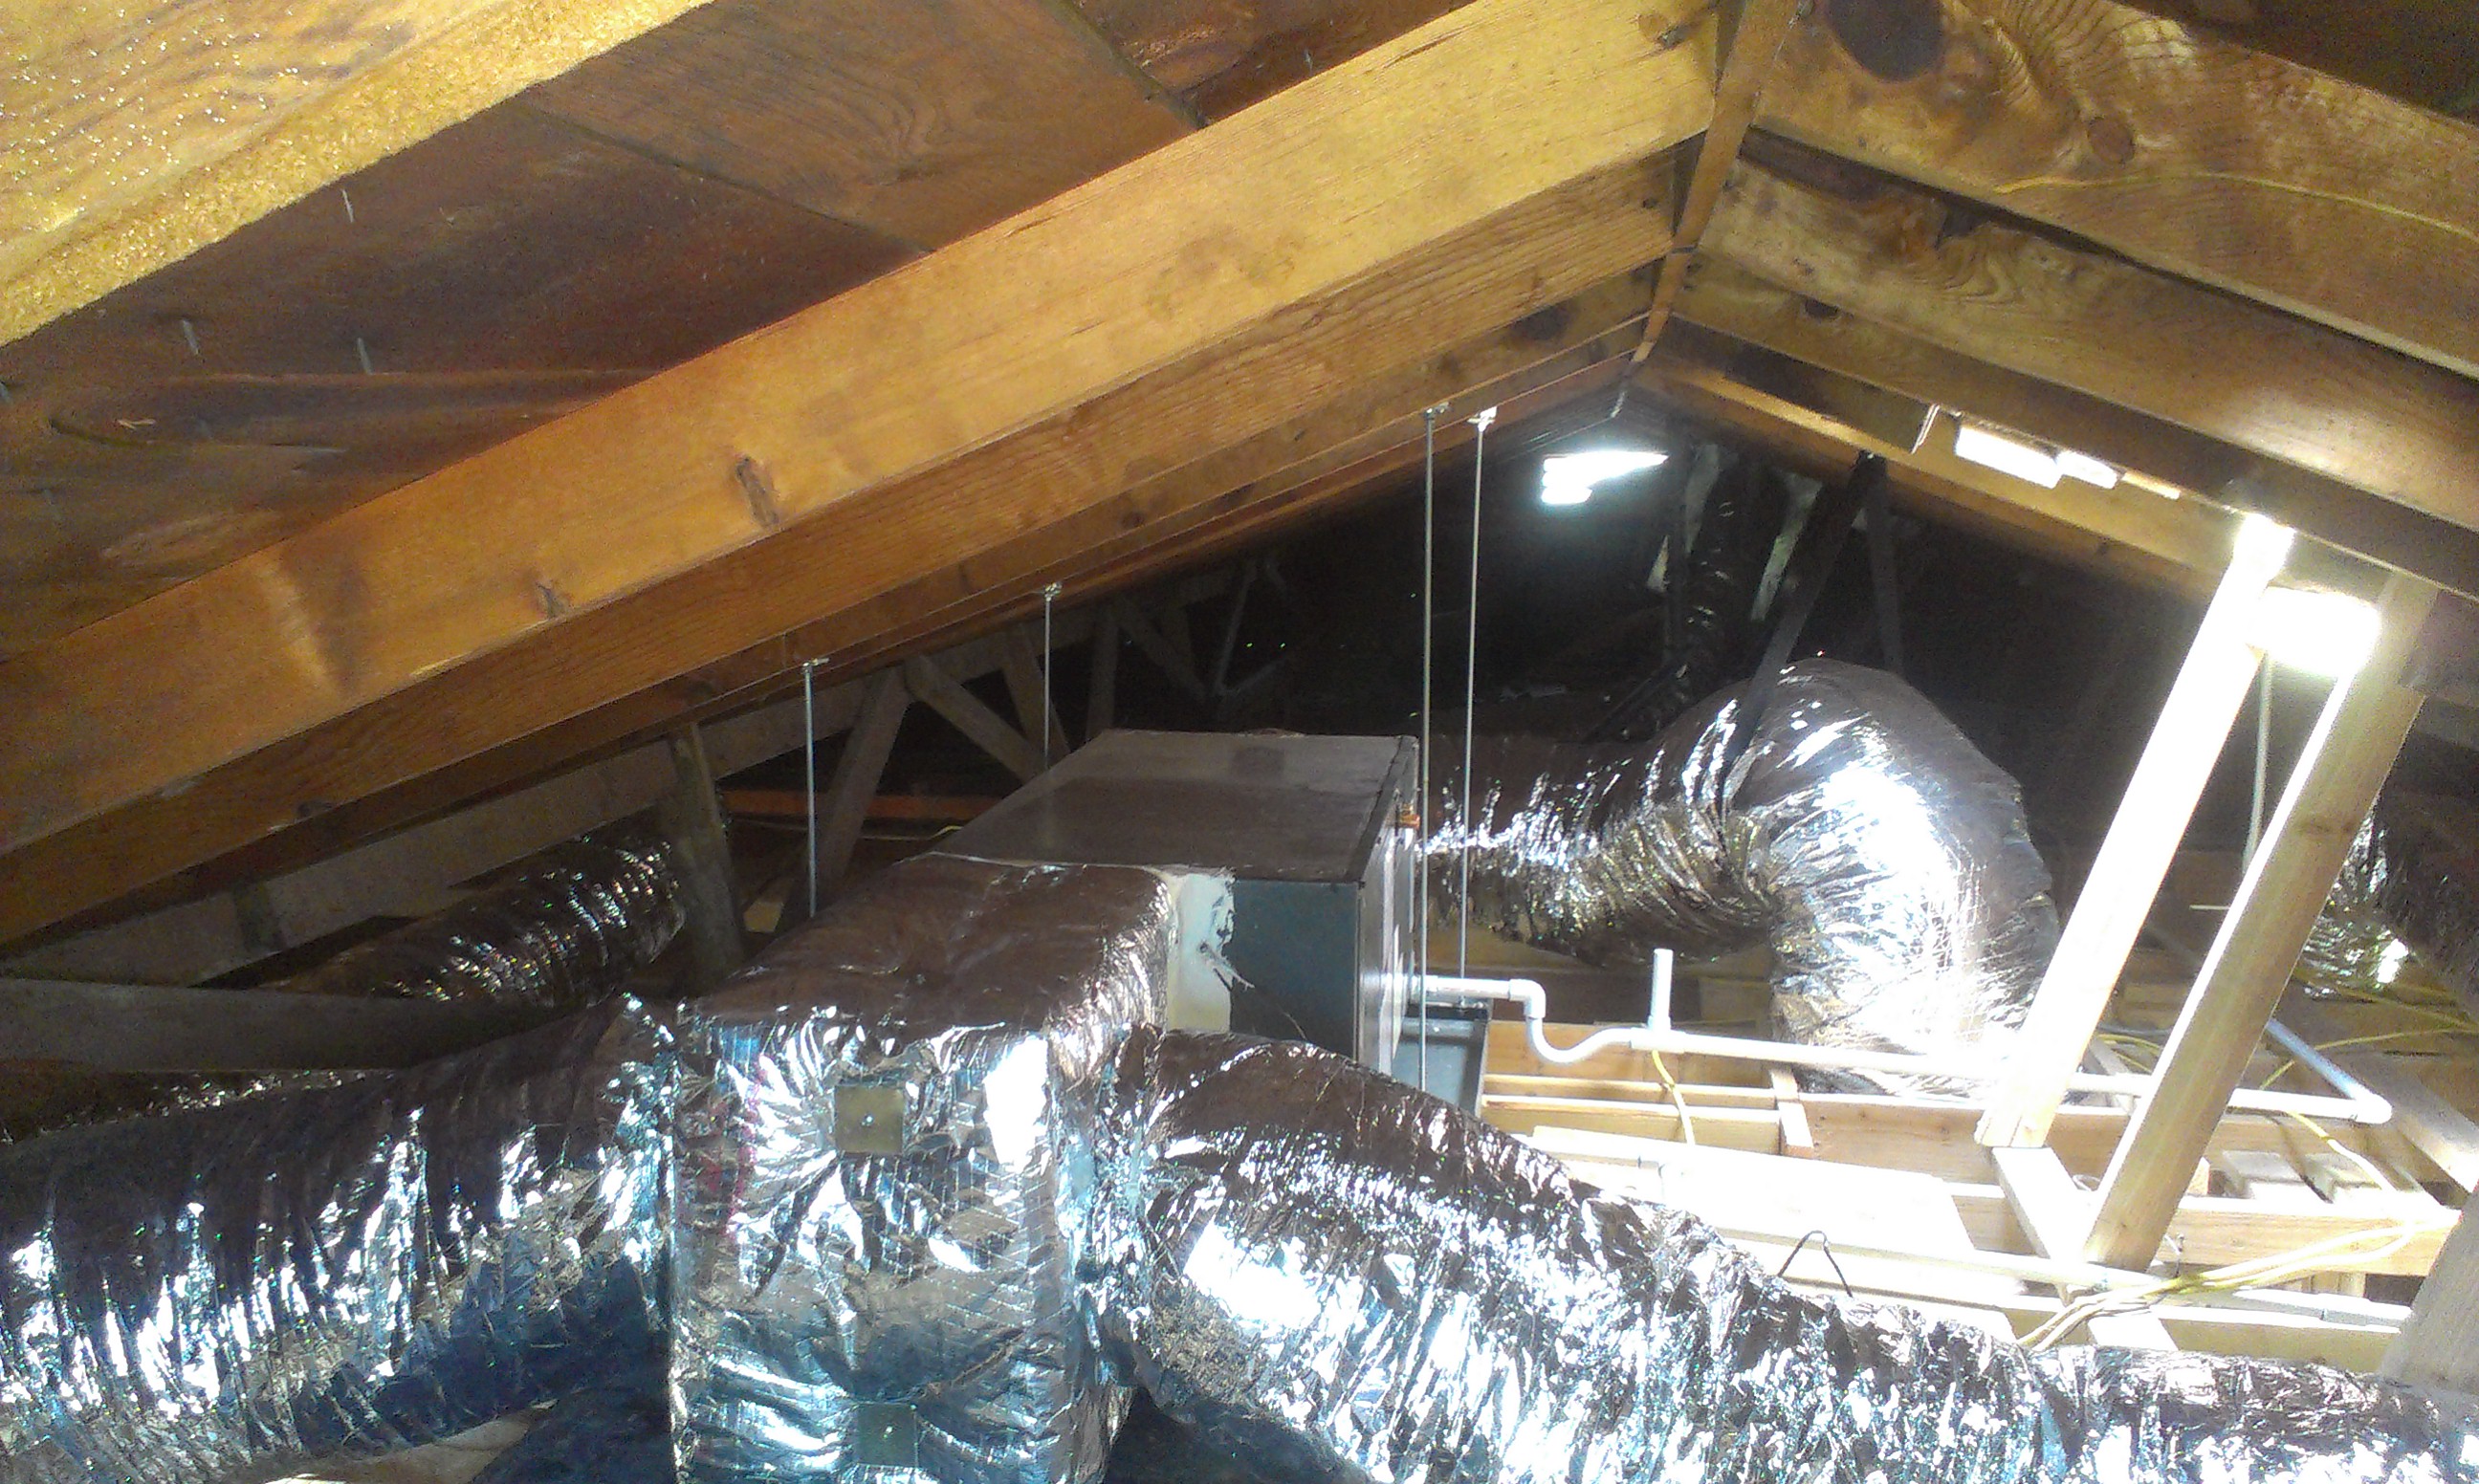 Attic installation of apartment system in central Phoenix completed